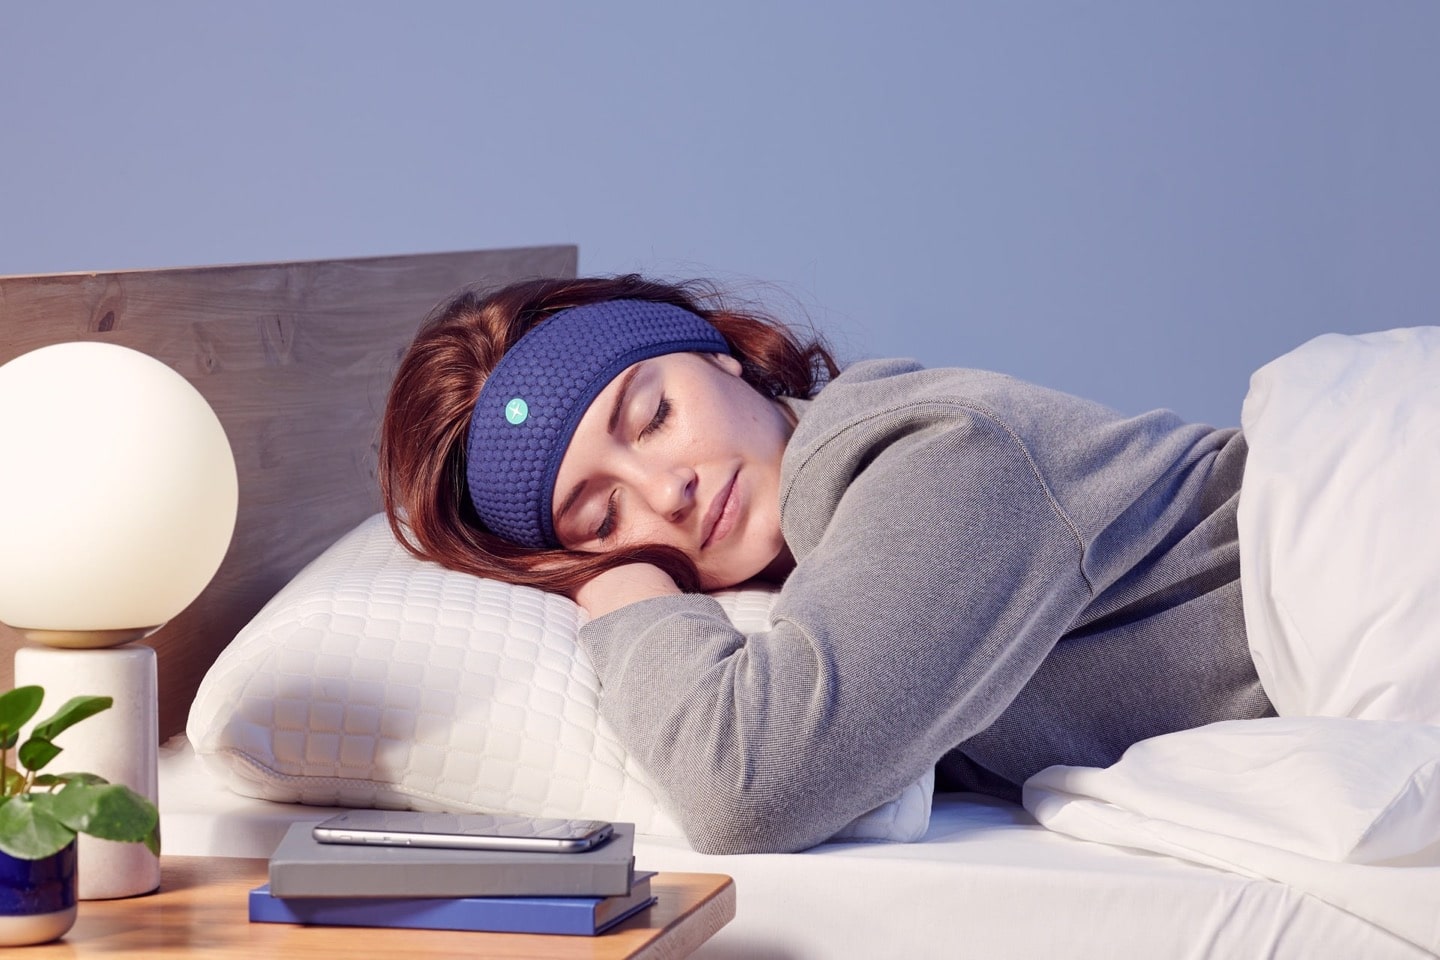 Dodow Reviews – Sleep Device that works - Product Review by Mike